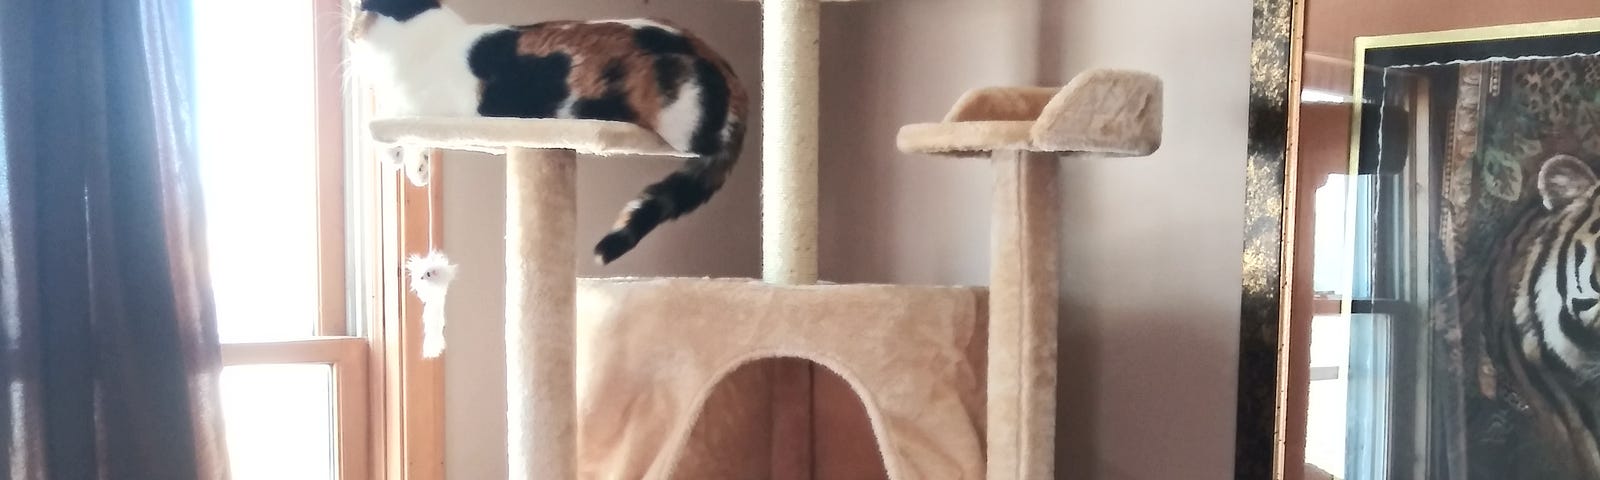 Image shows a “cat tree” with a calico cat and black cat sitting on different levels. The calico is looking out the window.